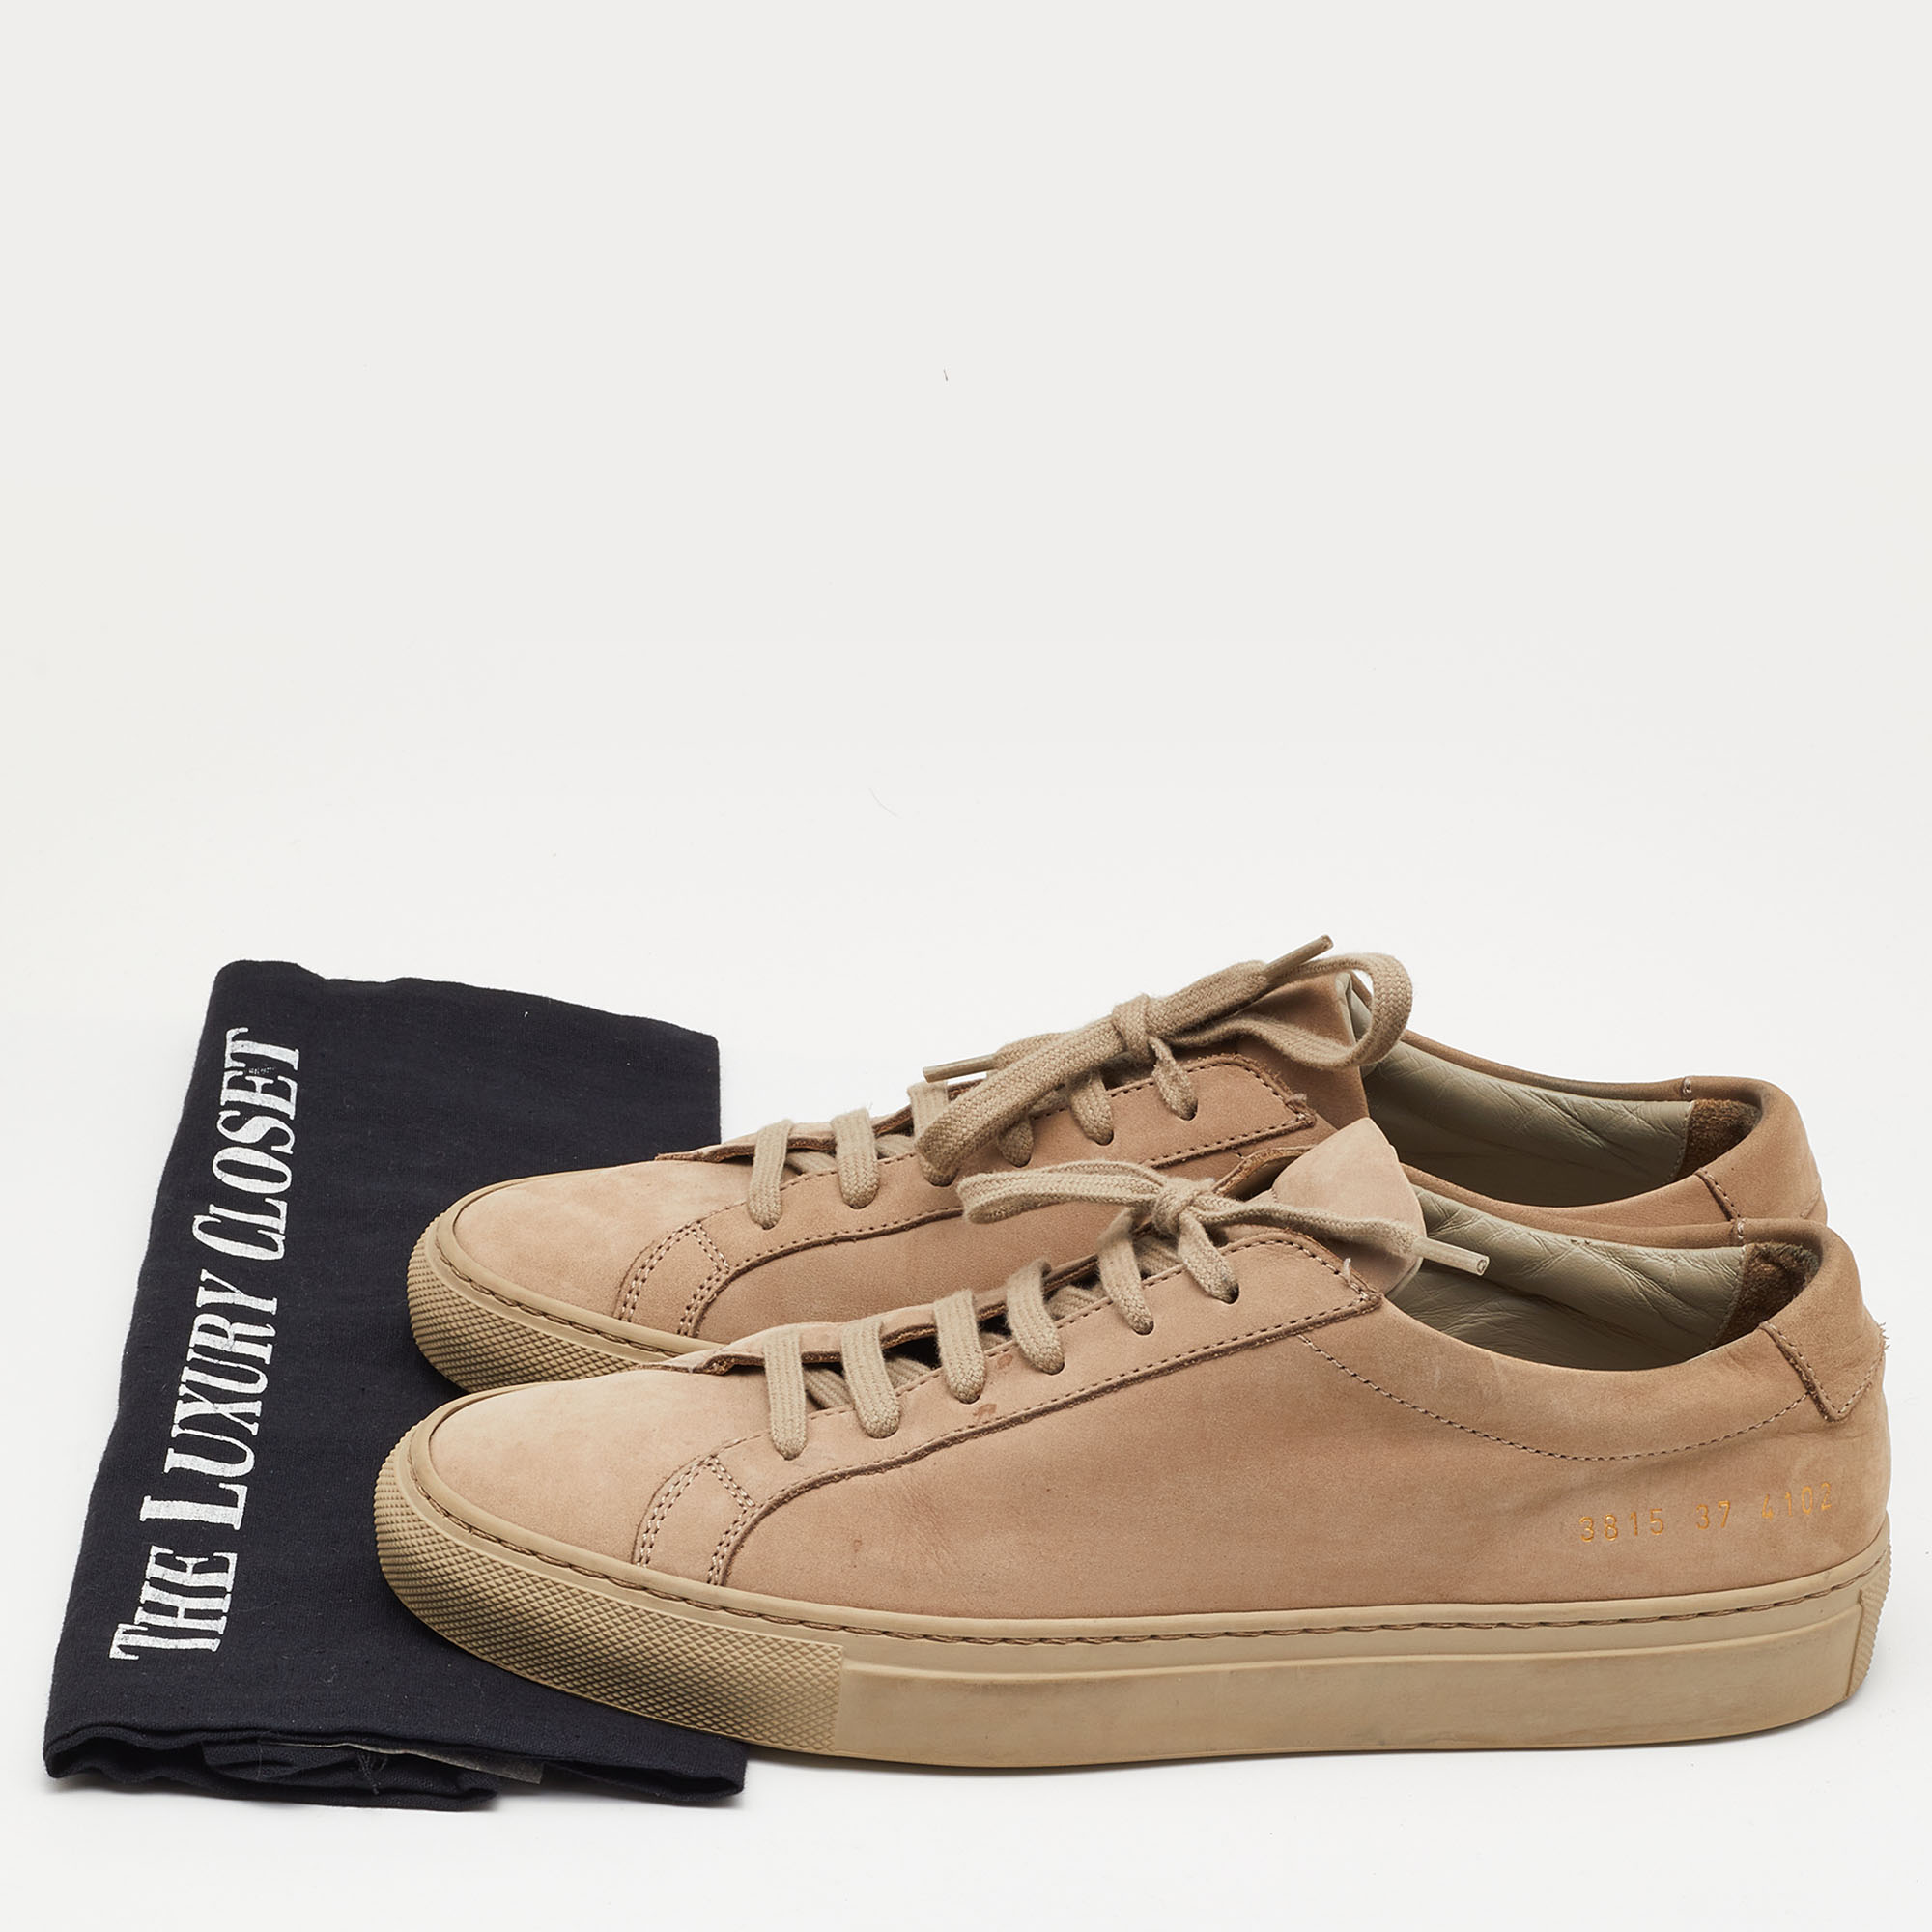 Common Projects Beige Suede Achilles Lace Up Sneakers Size 37